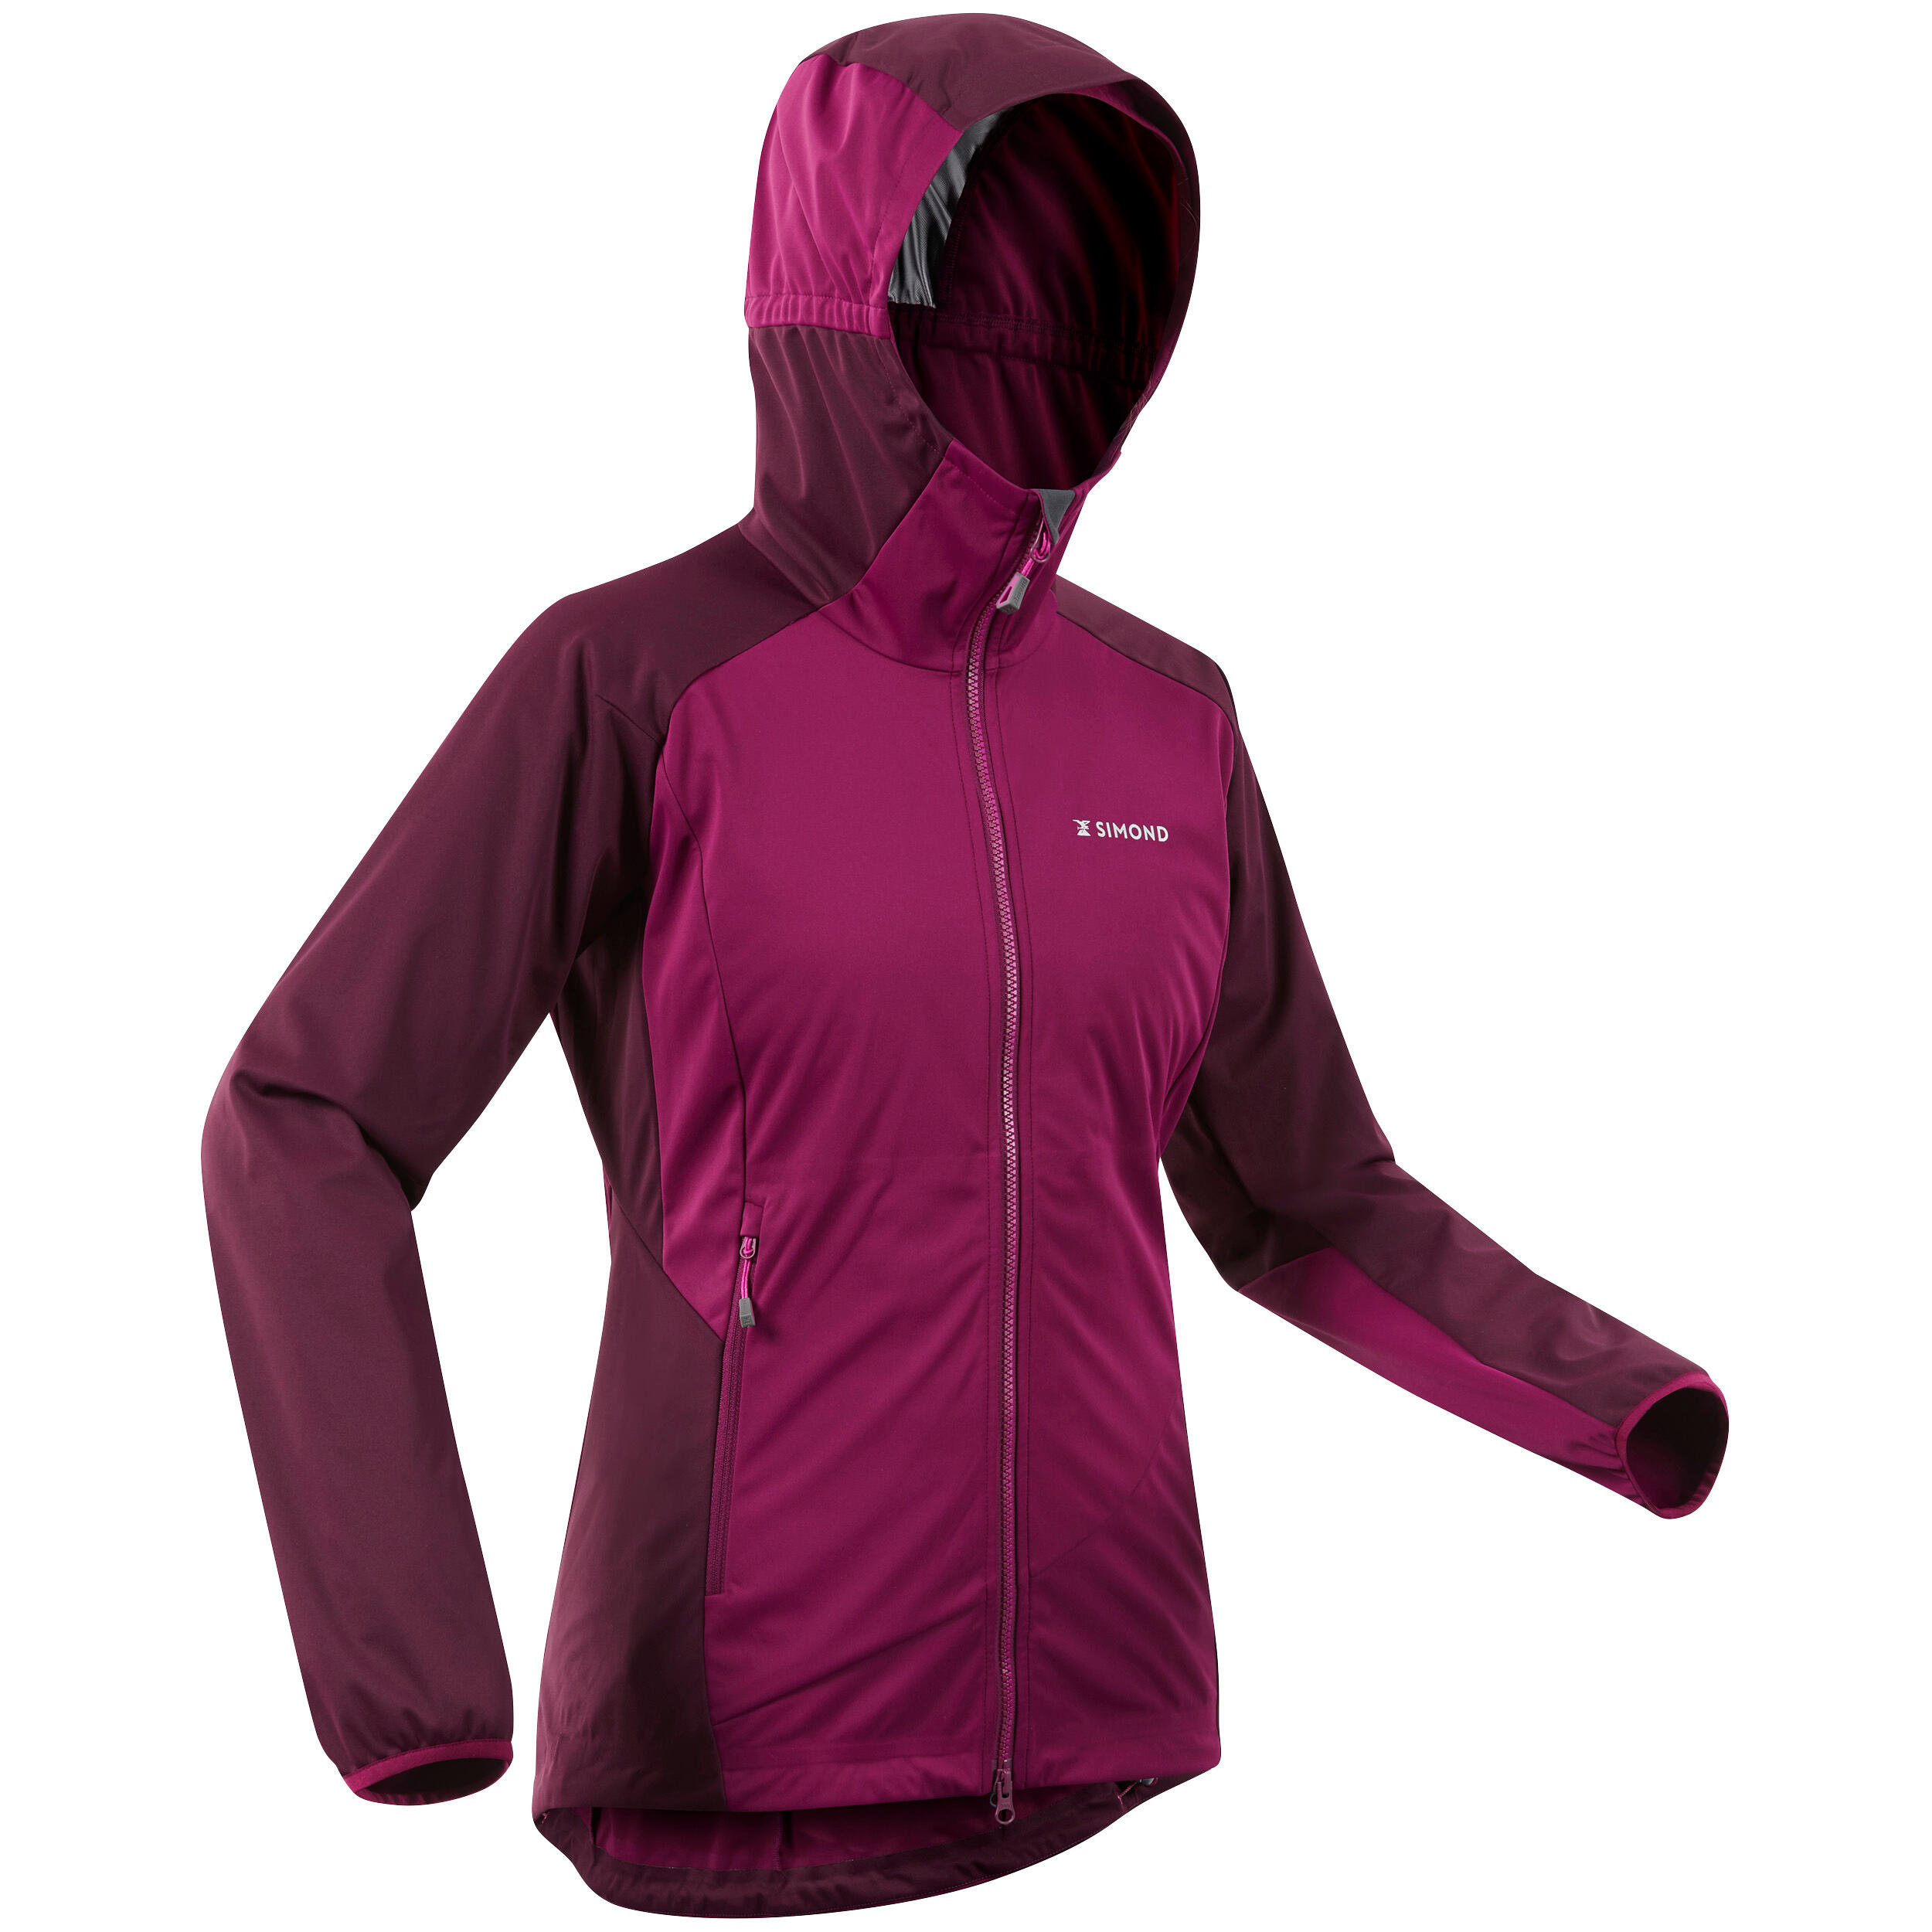 WOMEN'S MOUNTAINEERING SOFTSHELL JACKET - Beetroot Red 10/10